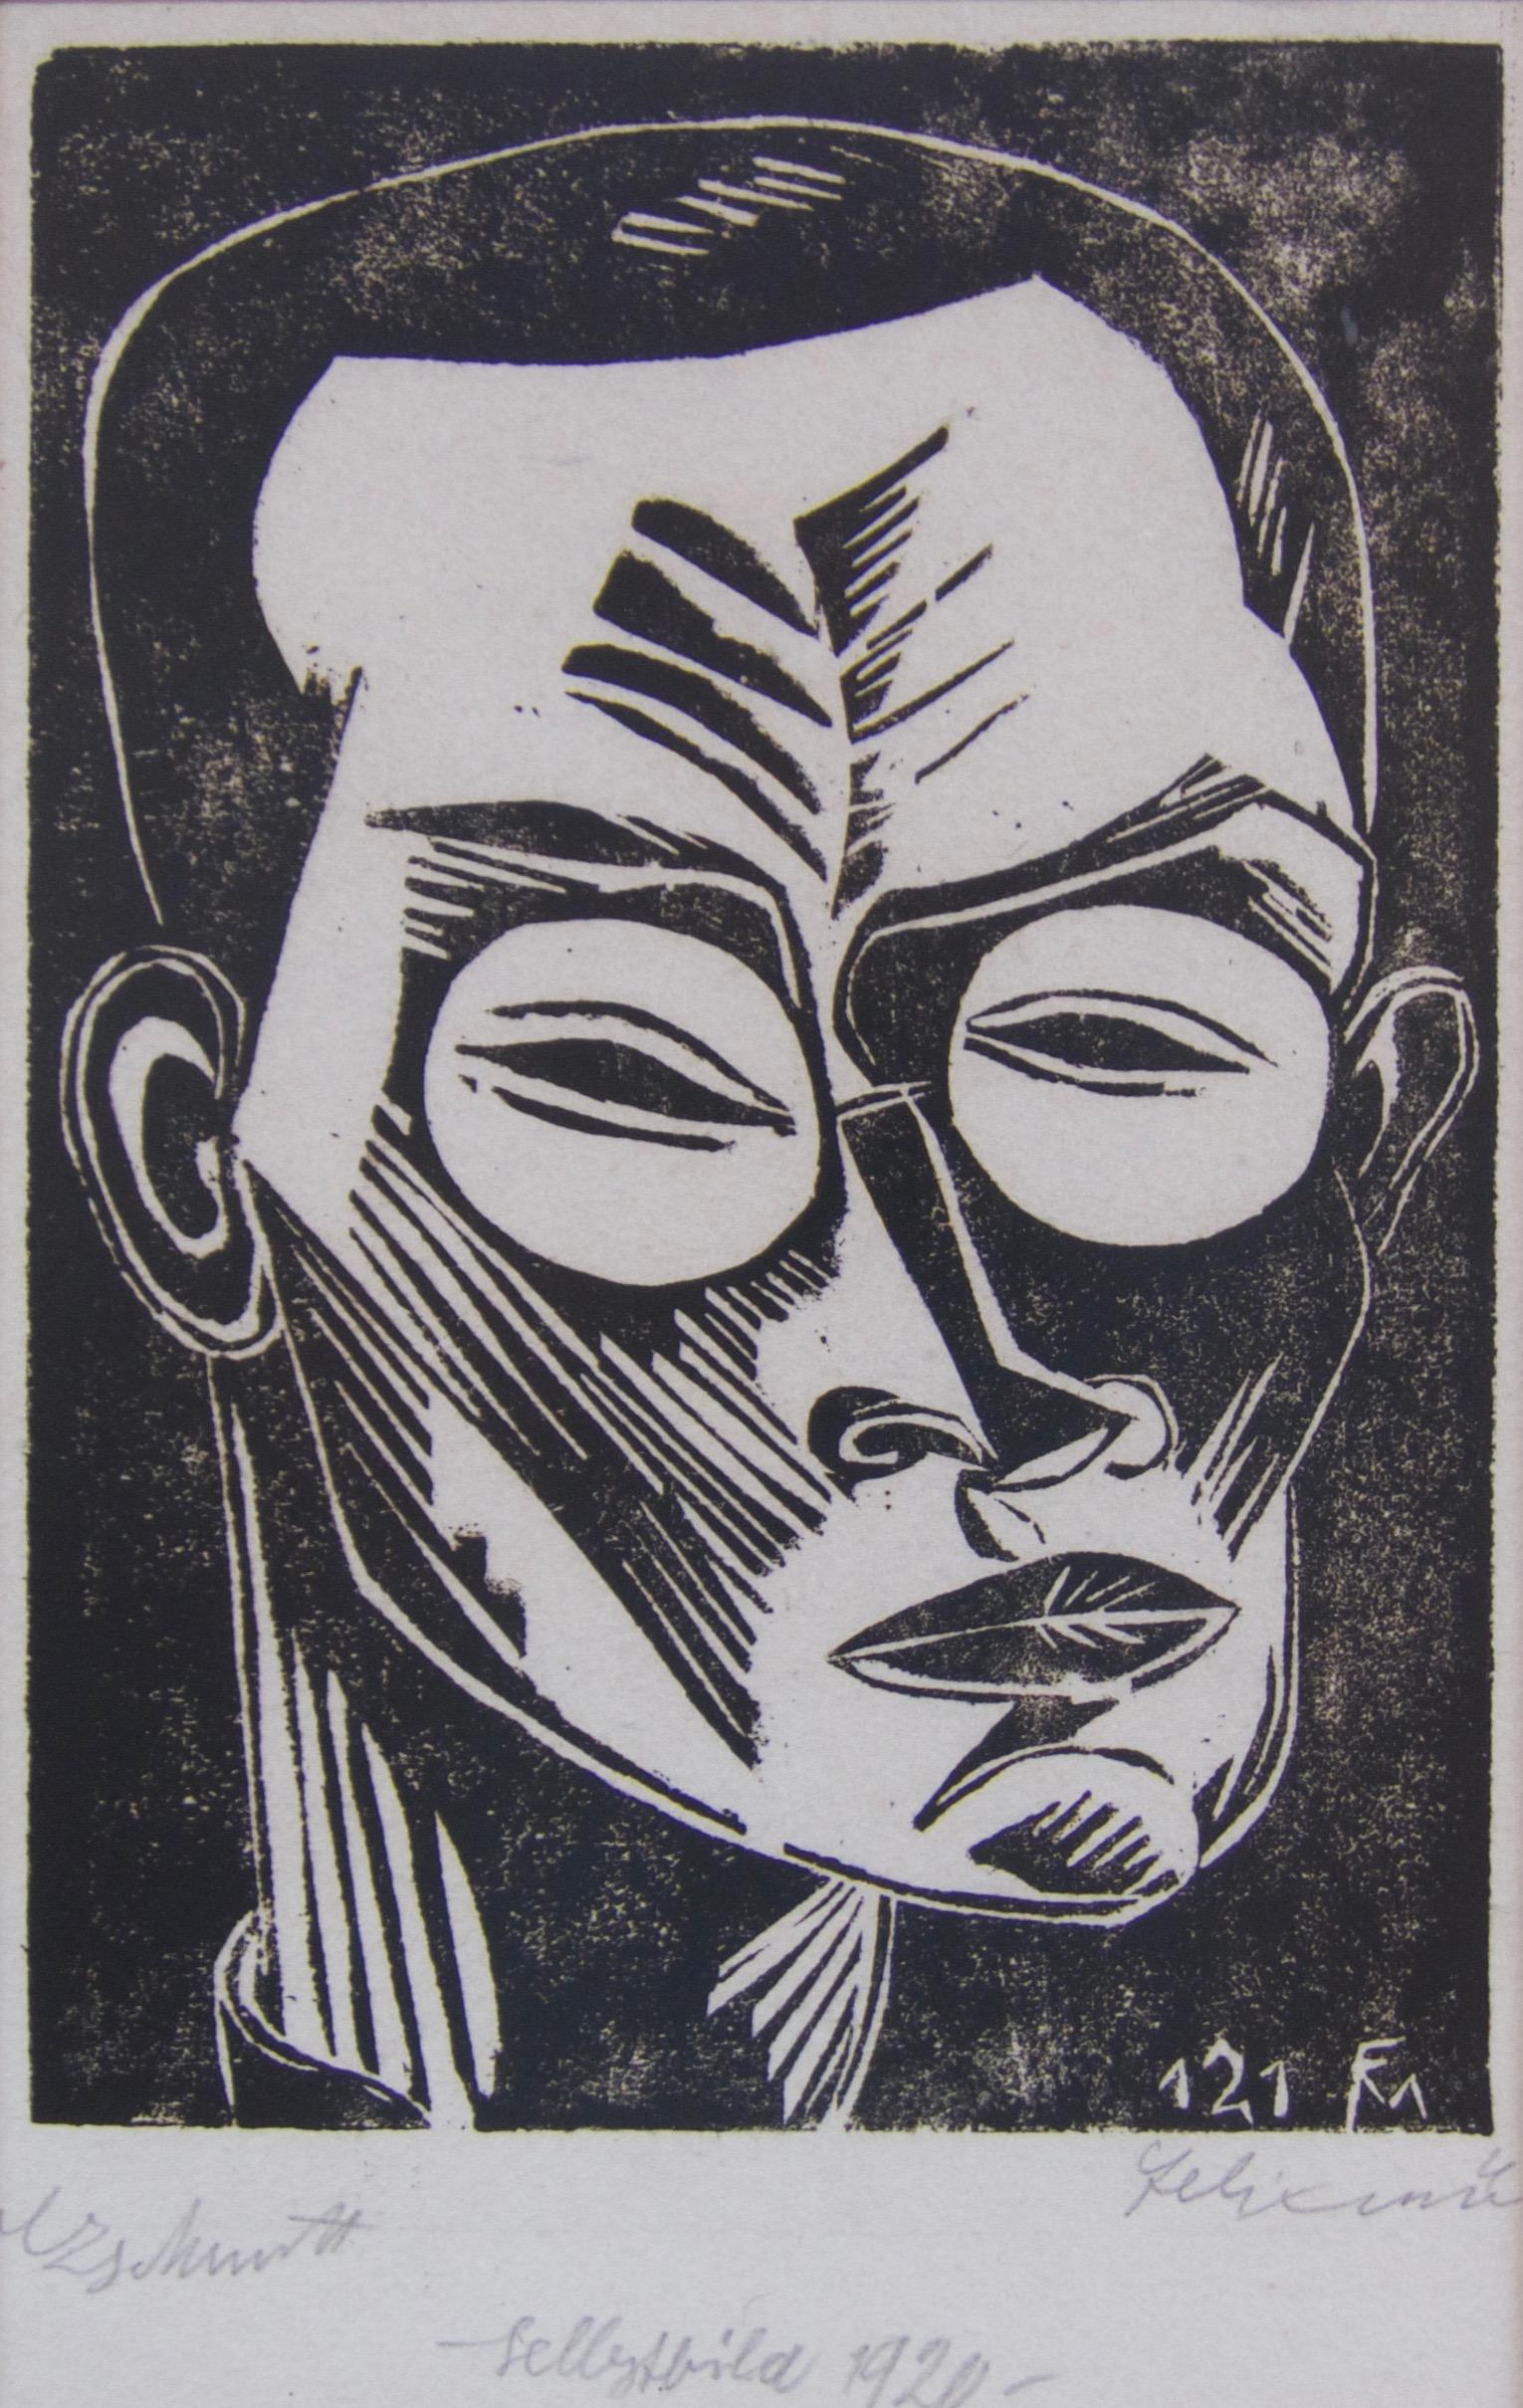 Important German Expressionist self portrait woodcut dated 1920 by Conrad Felixmuller.  This work is pencil signed and dated and comes with a catalog of the artist's work, which includes mention and illustration of the iconic self portrait print